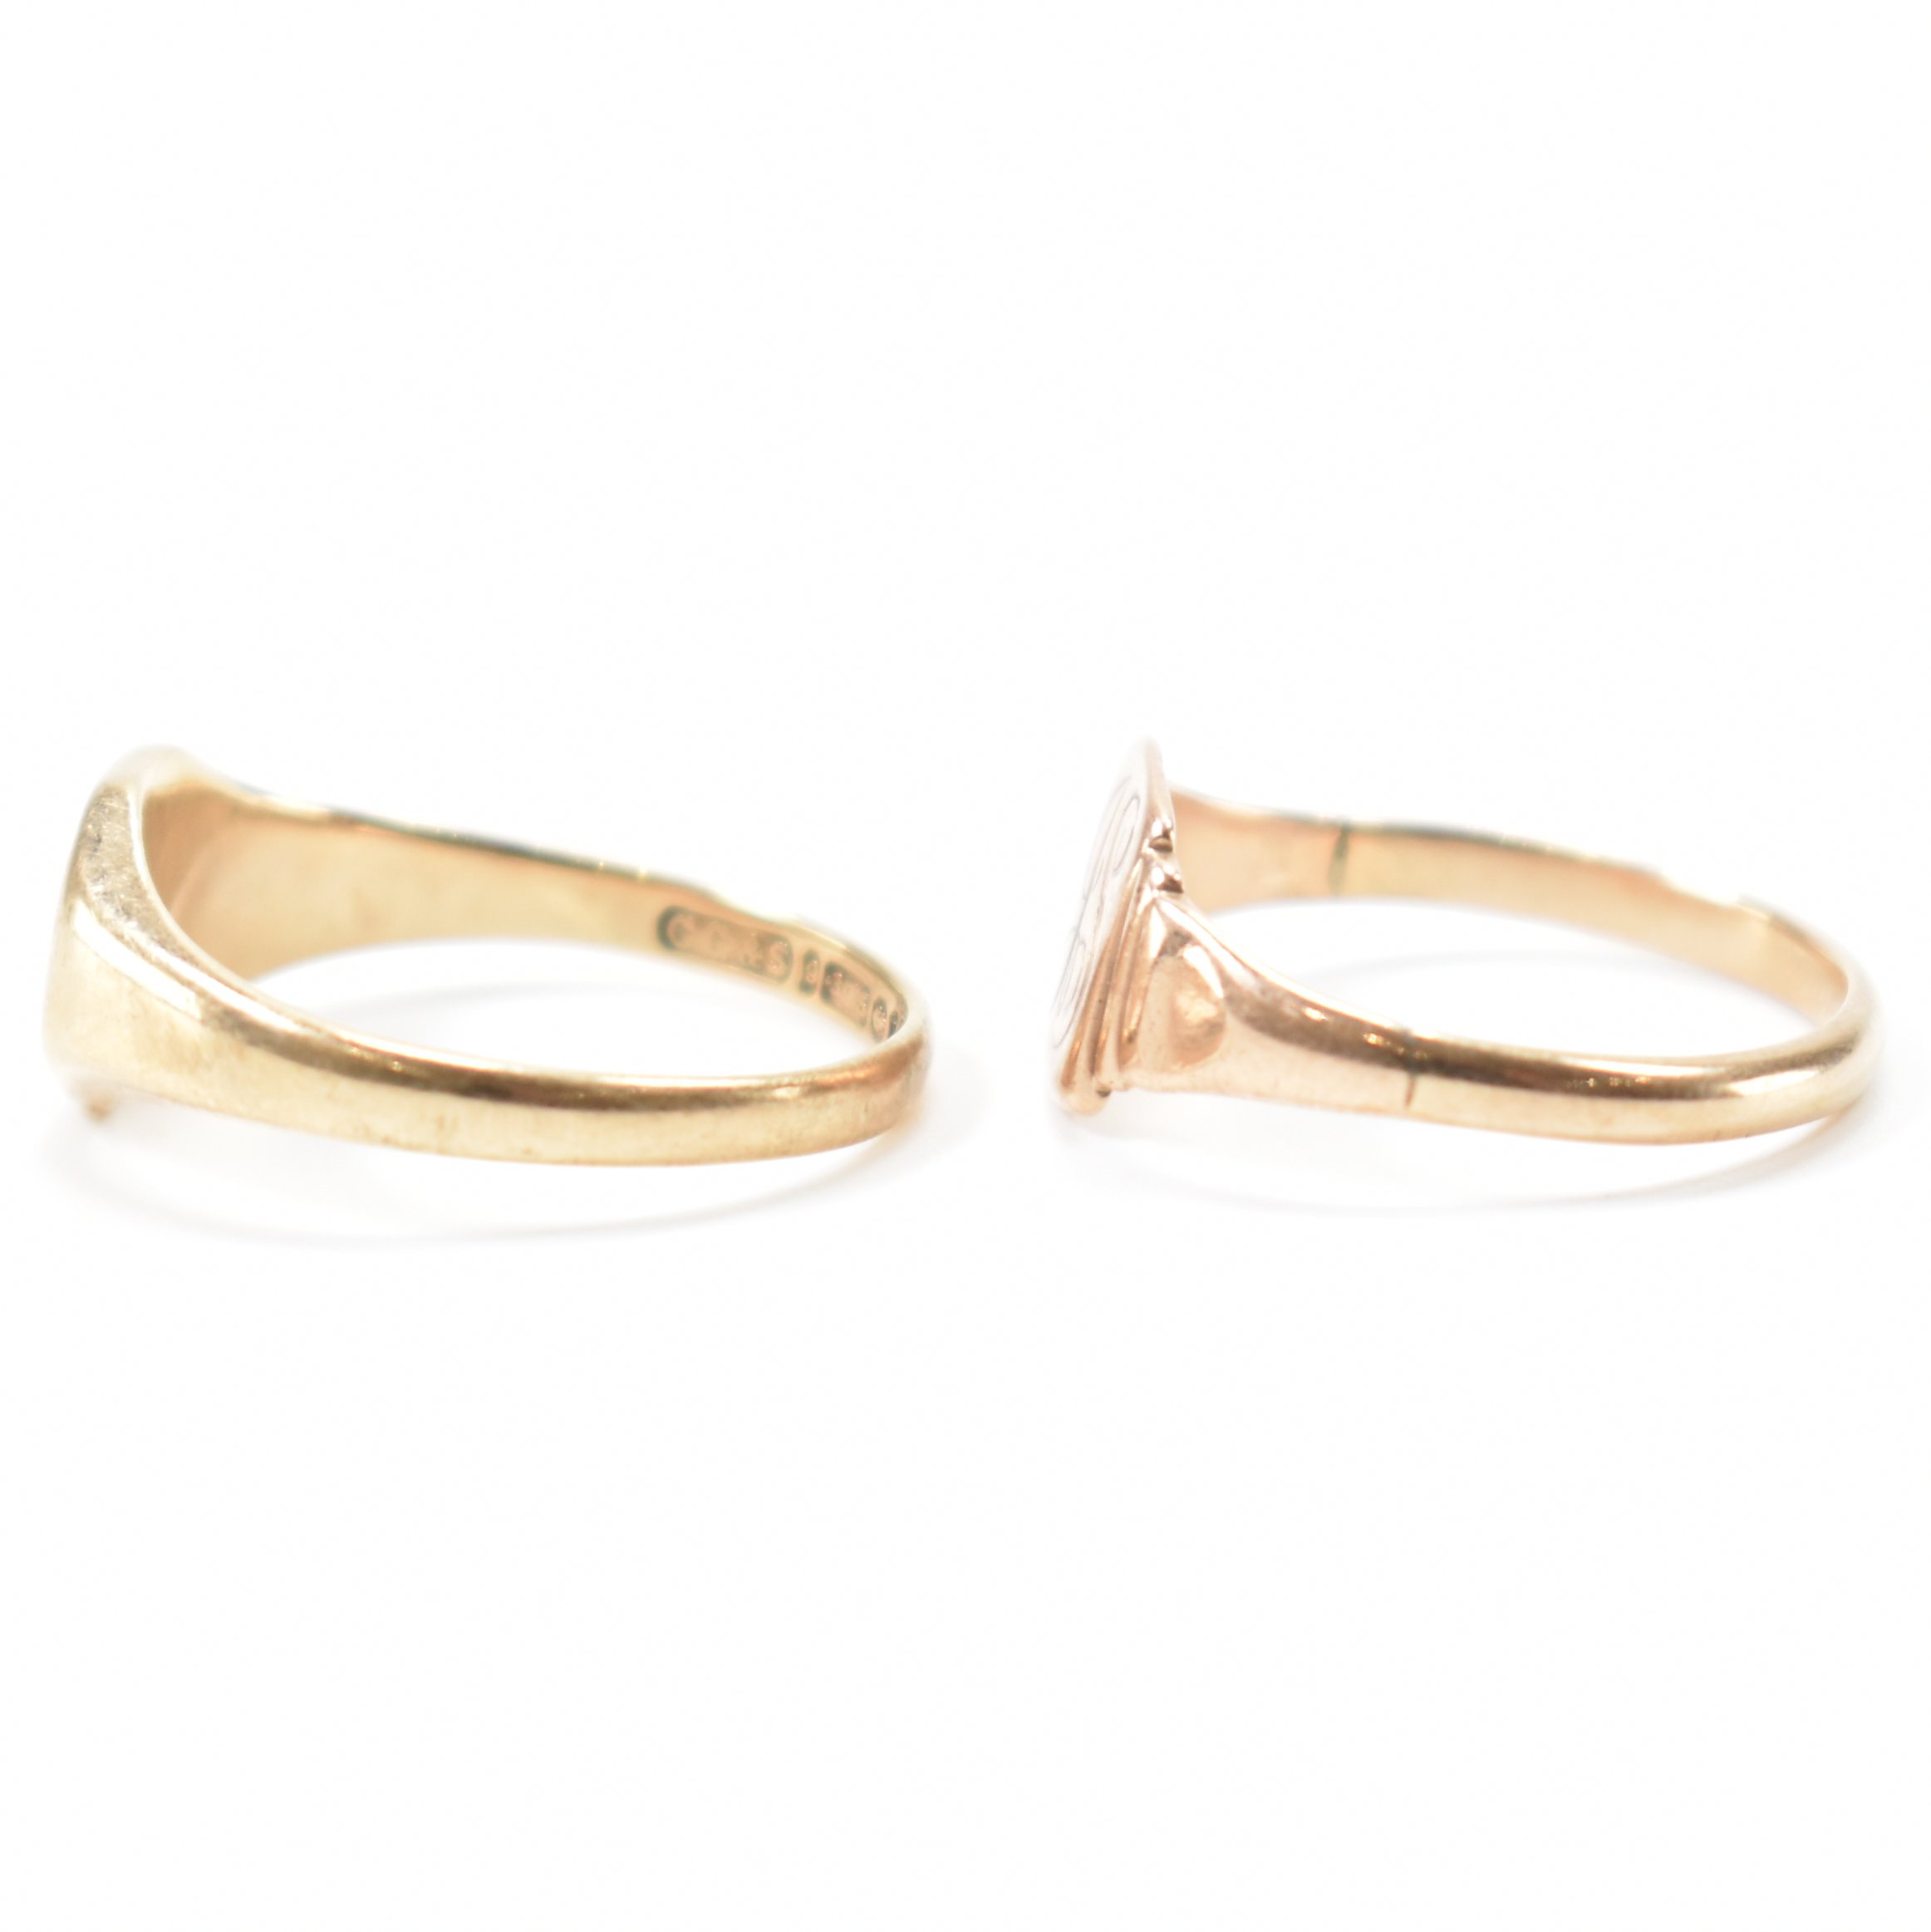 TWO 9CT GOLD SIGNET RINGS - Image 2 of 7